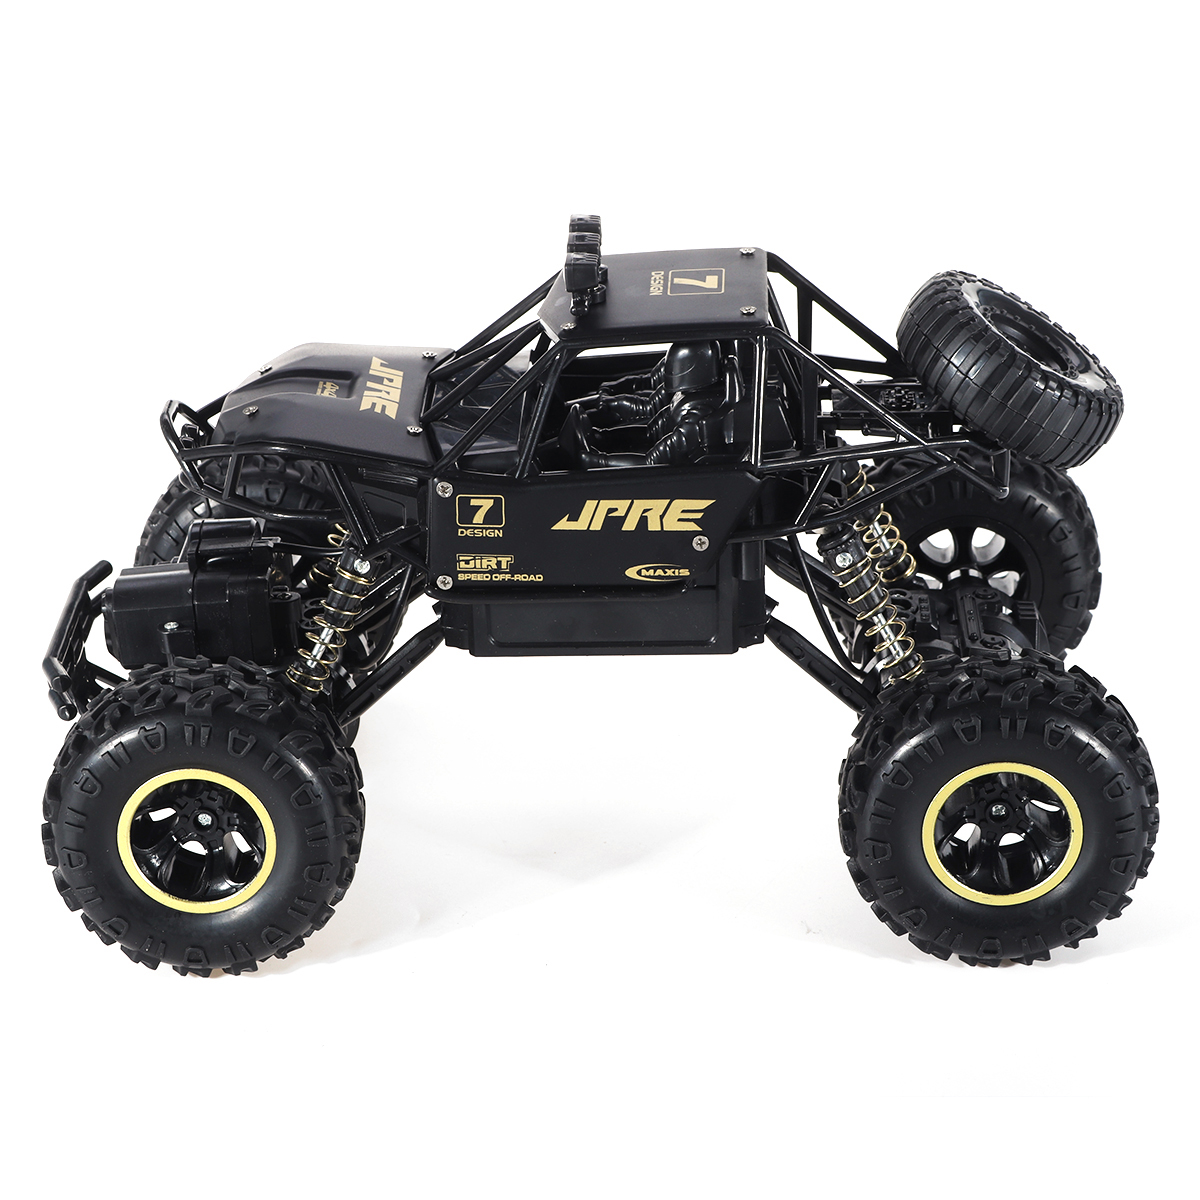 1:16 Alloy Remote Controls Car Monster Trucks, 4WD Climbing RC Cars Off Road, RC Crawler Toys for Boys Kids Gifts - image 11 of 11